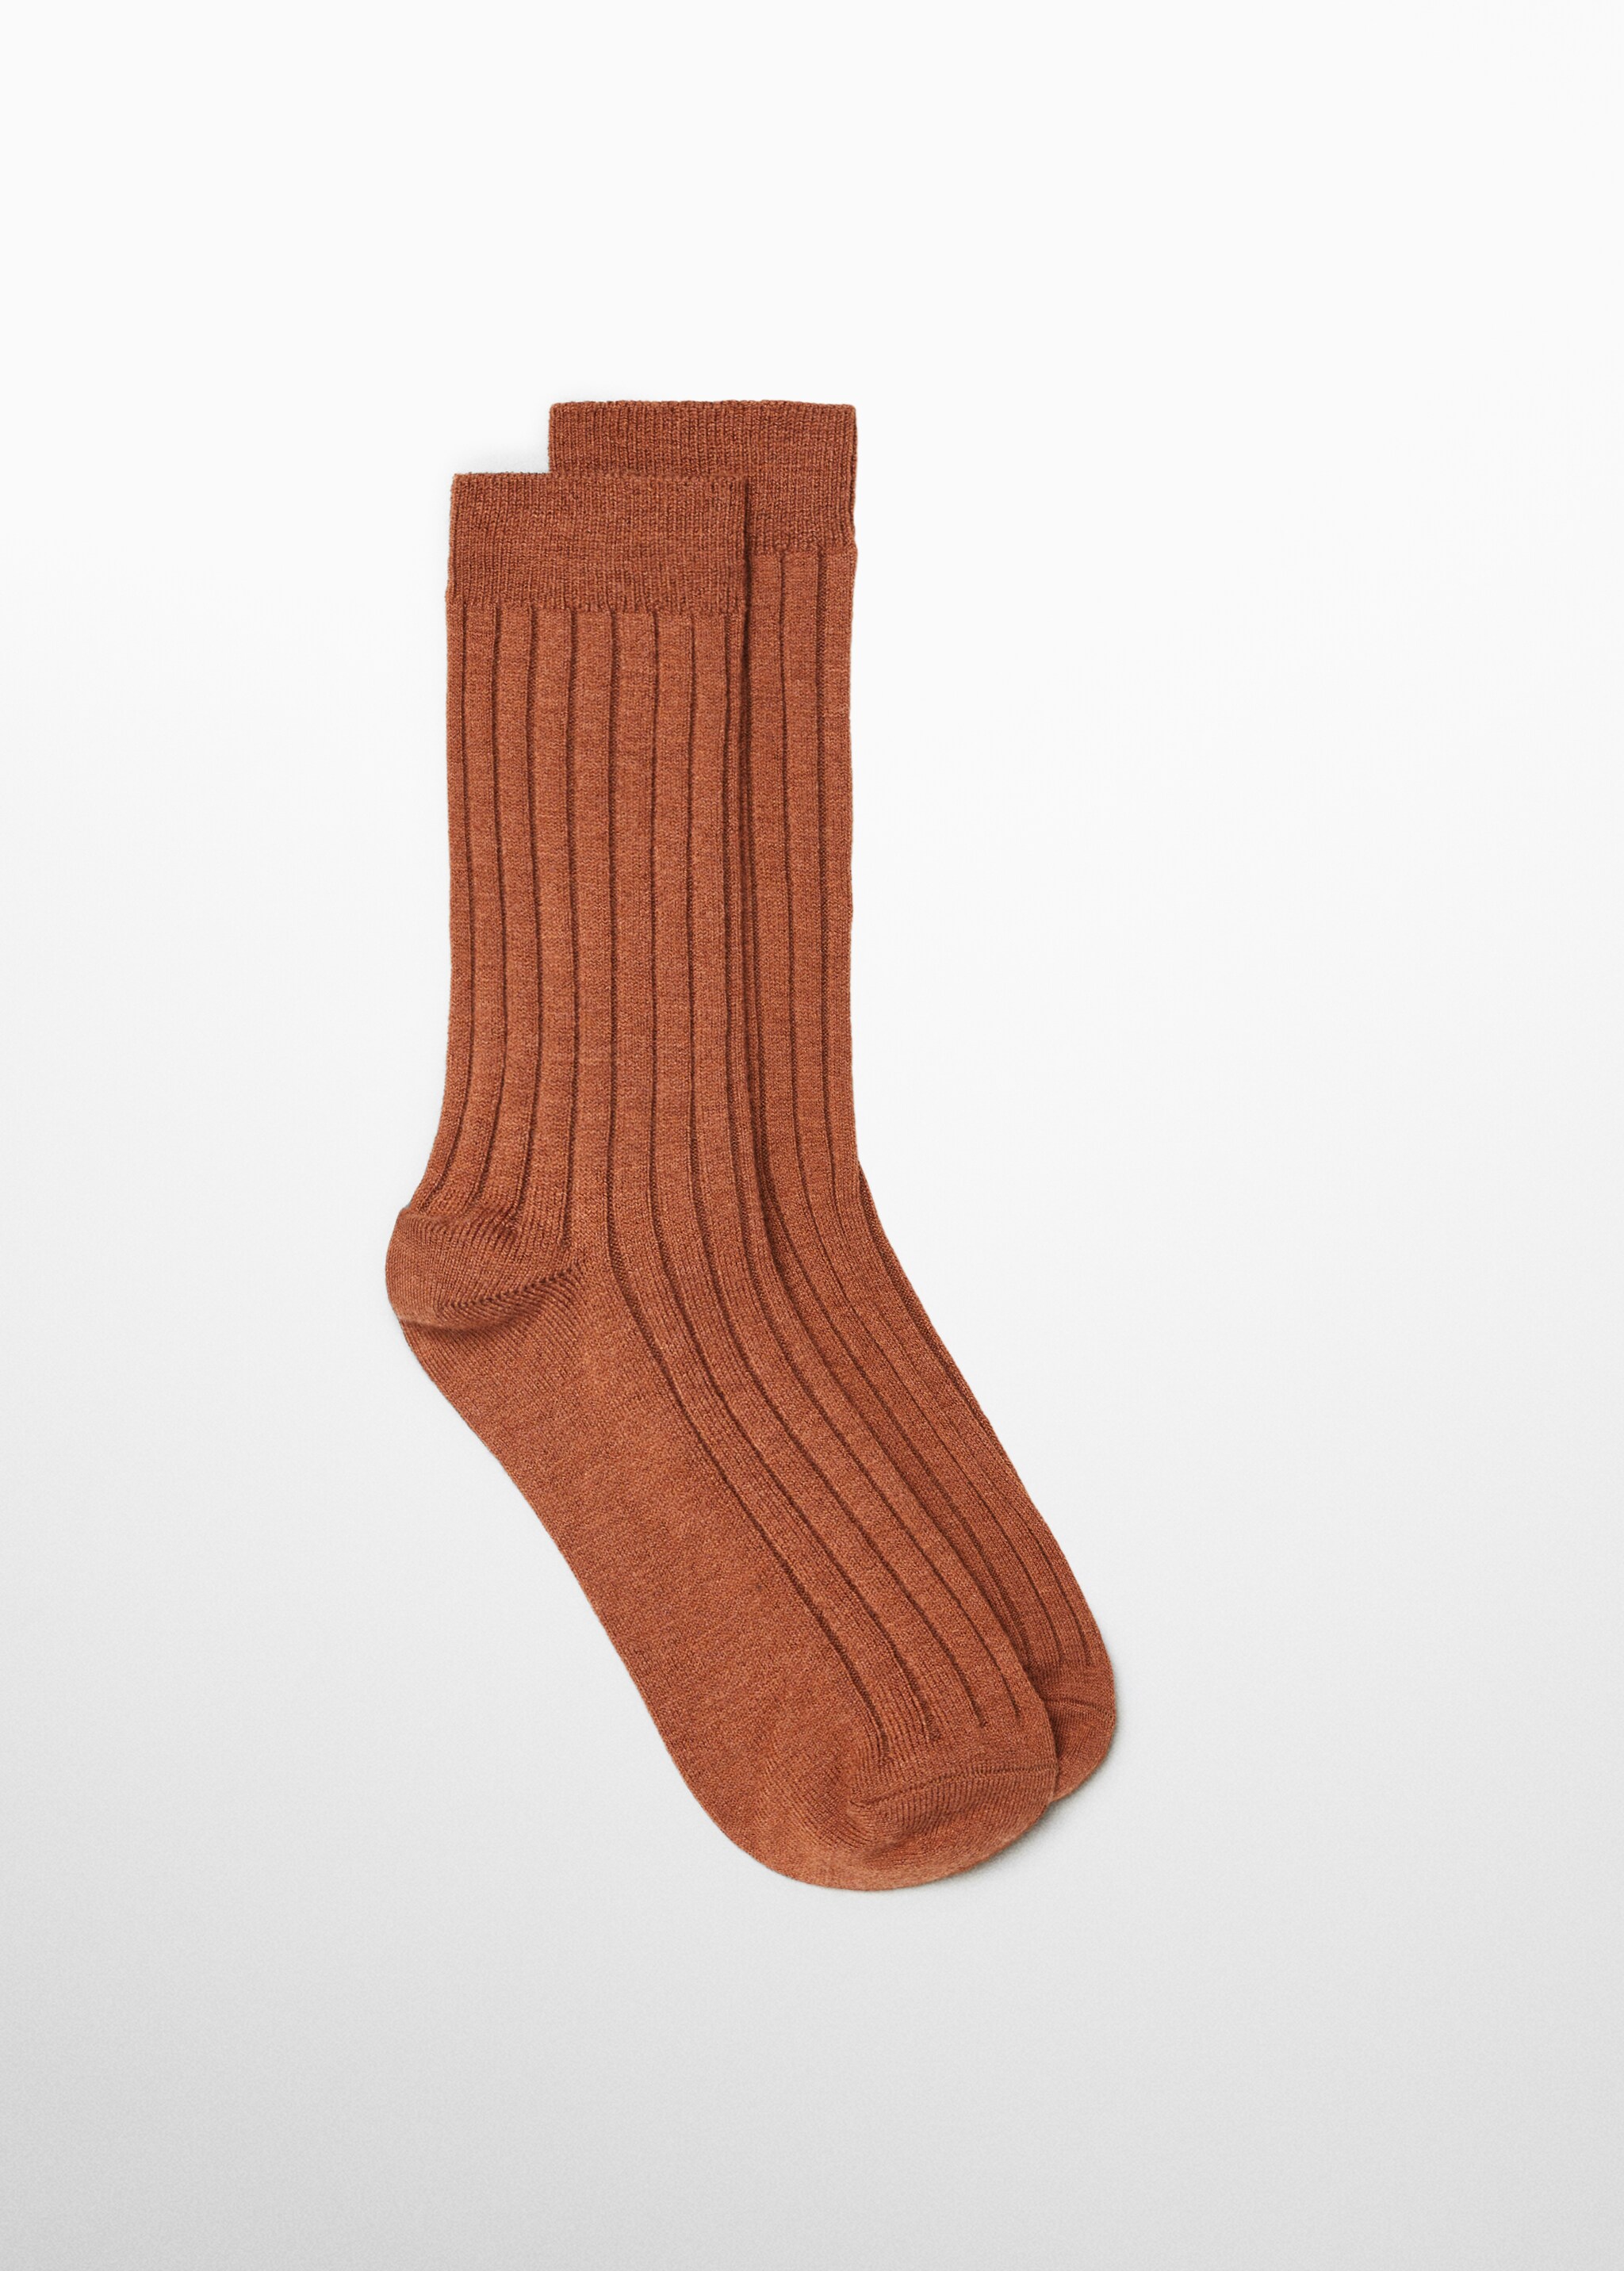 Ribbed socks - Article without model